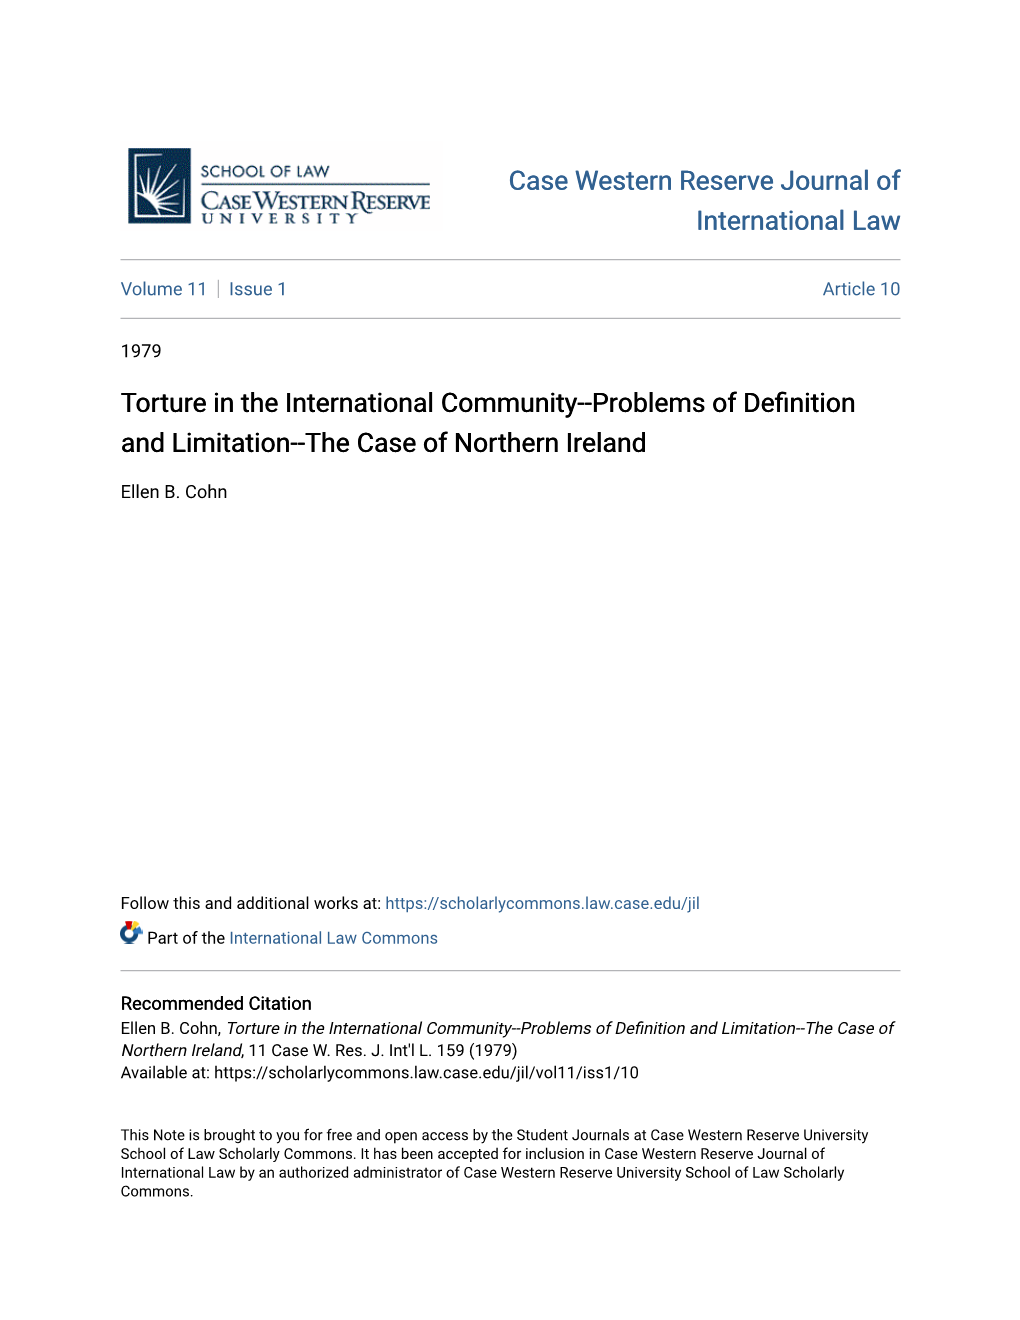 Torture in the International Community--Problems of Definition and Limitation--The Case of Northern Ireland